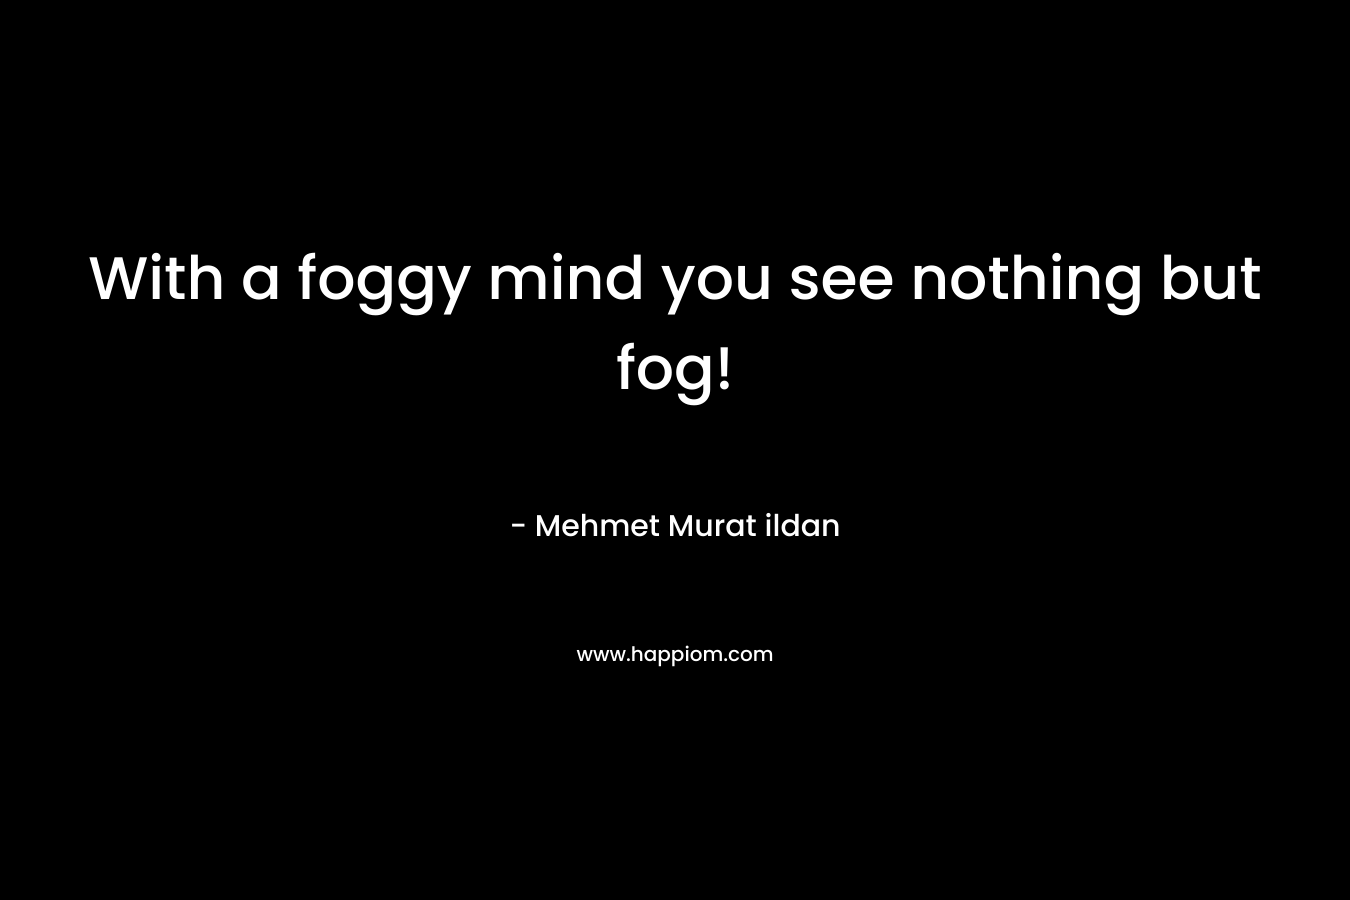 With a foggy mind you see nothing but fog! – Mehmet Murat ildan